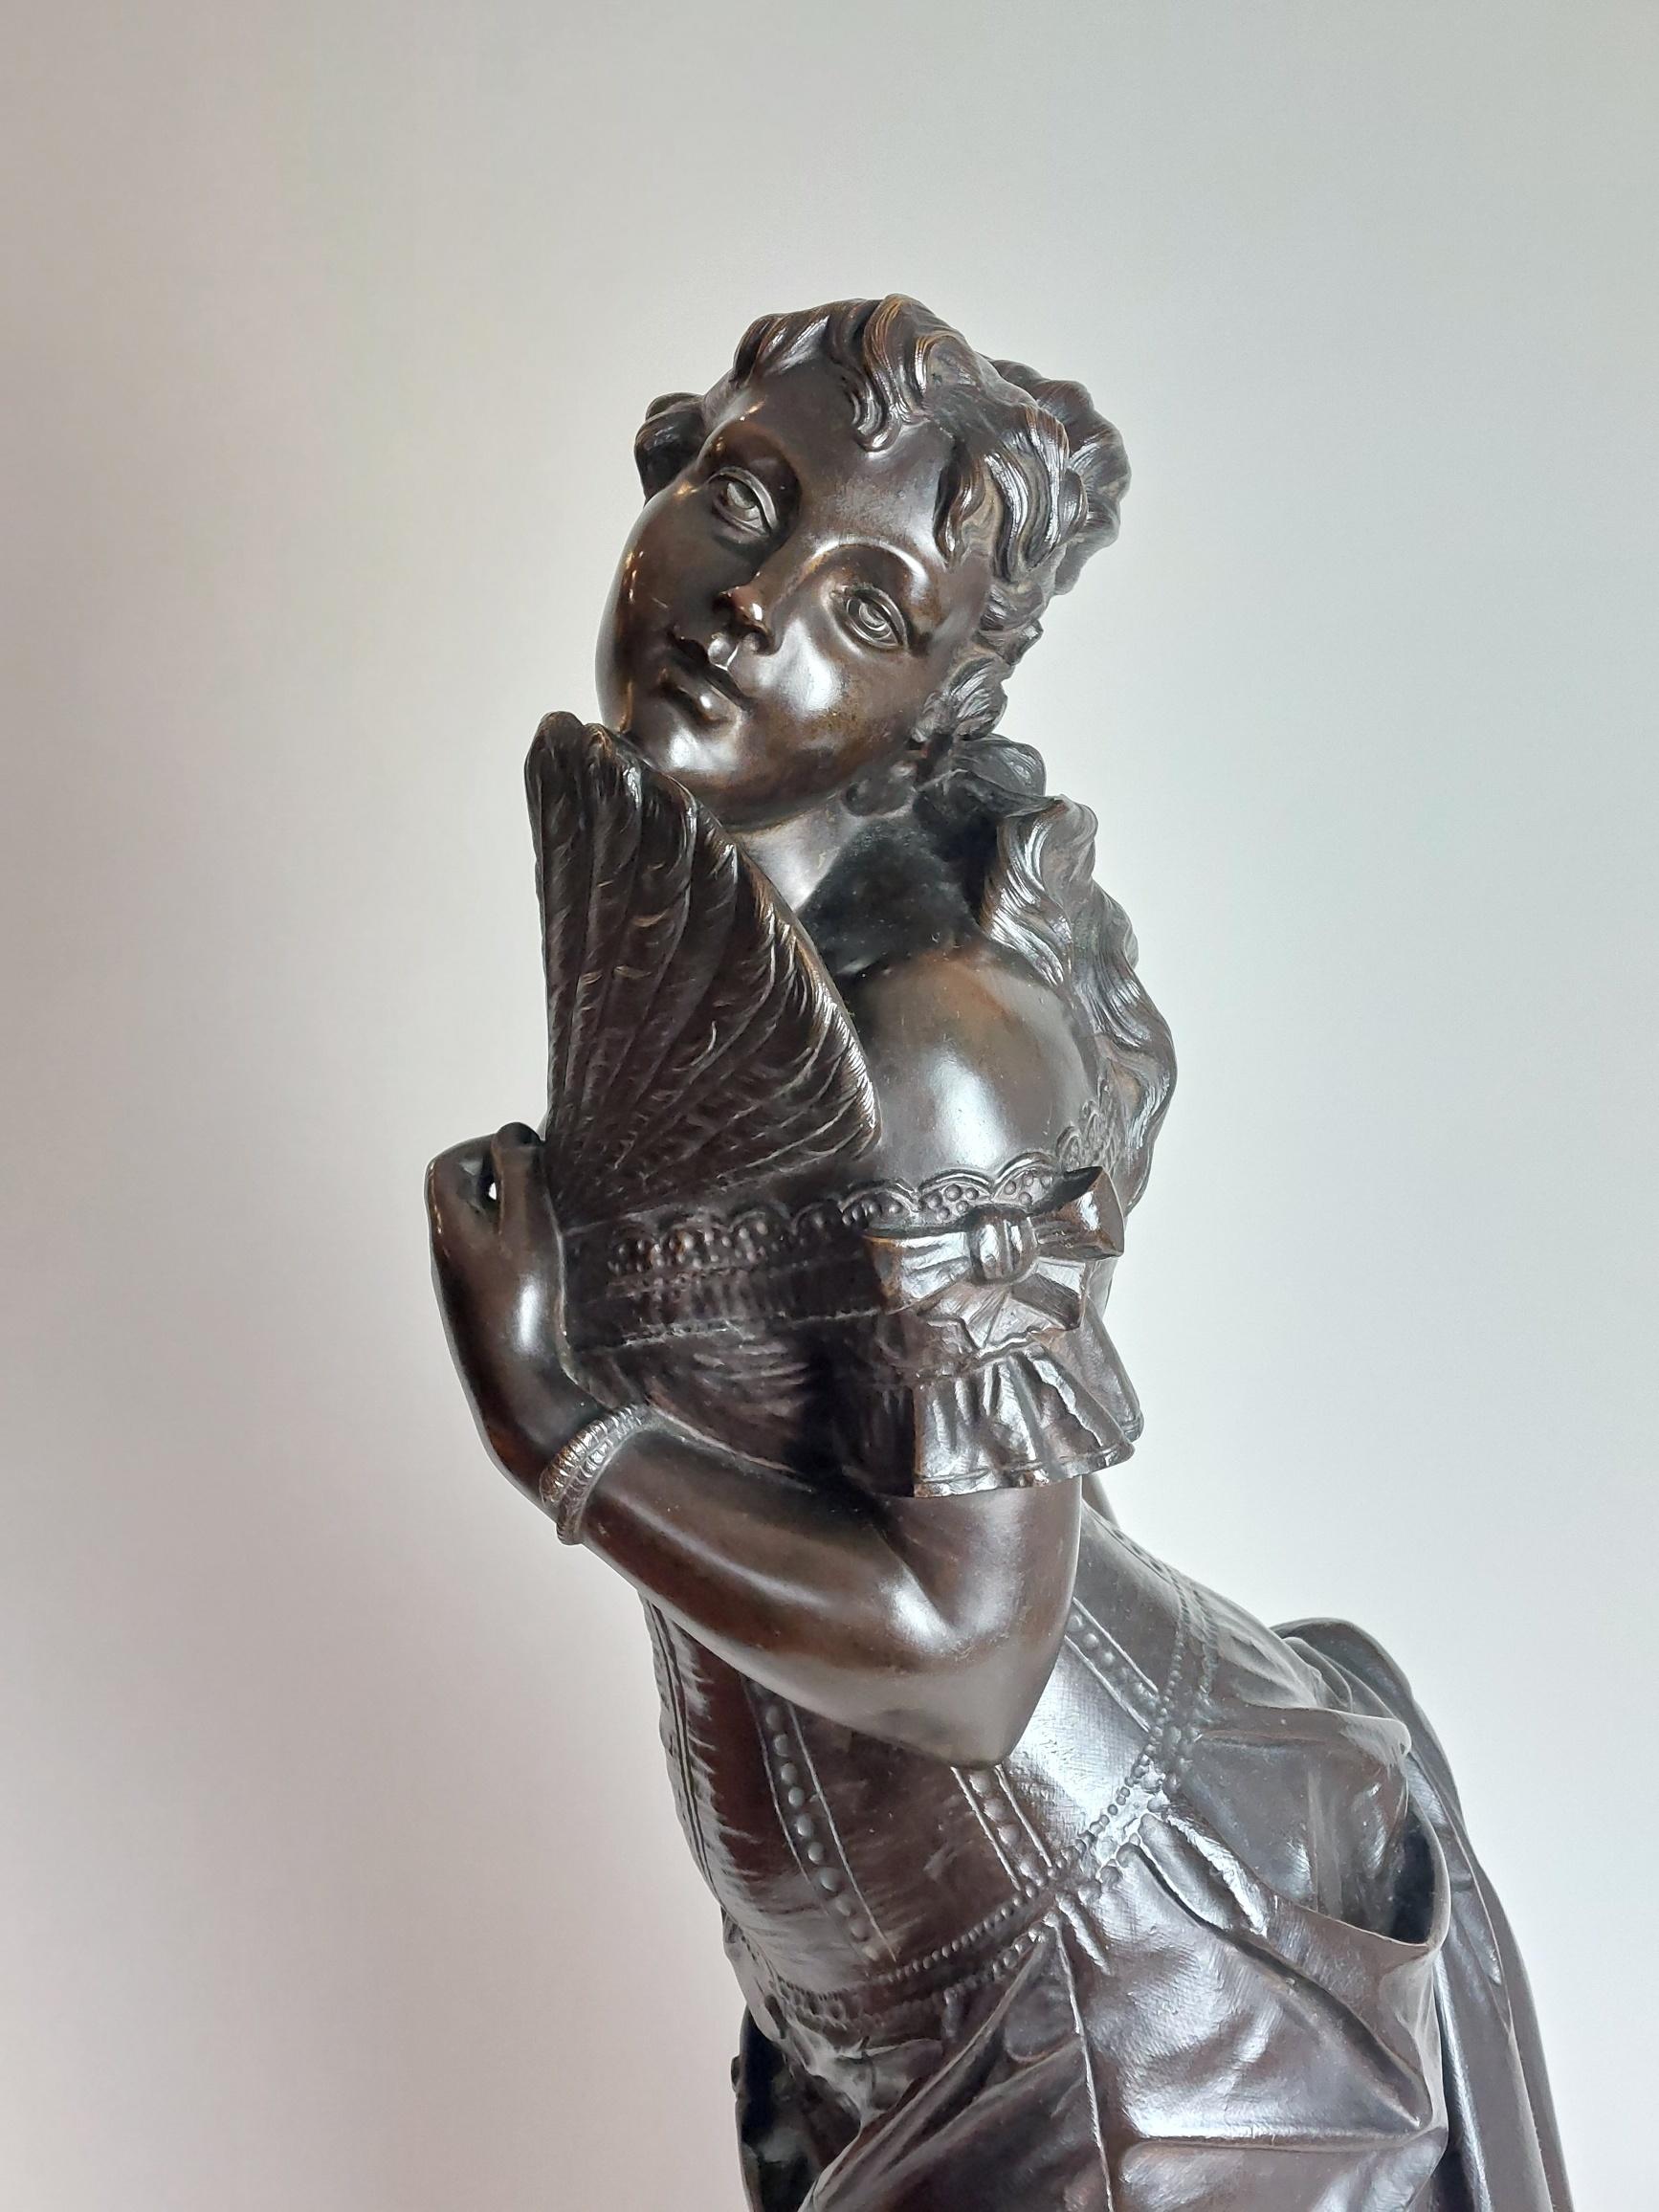 A flirtatious 19th century bronze of ‘La Coquette’ this playful bronze lady is dressed in a classic French corset and holds her fan as she looks cheekily over her shoulder.

Fabri
Fabri was a French foundry in the 19th century.